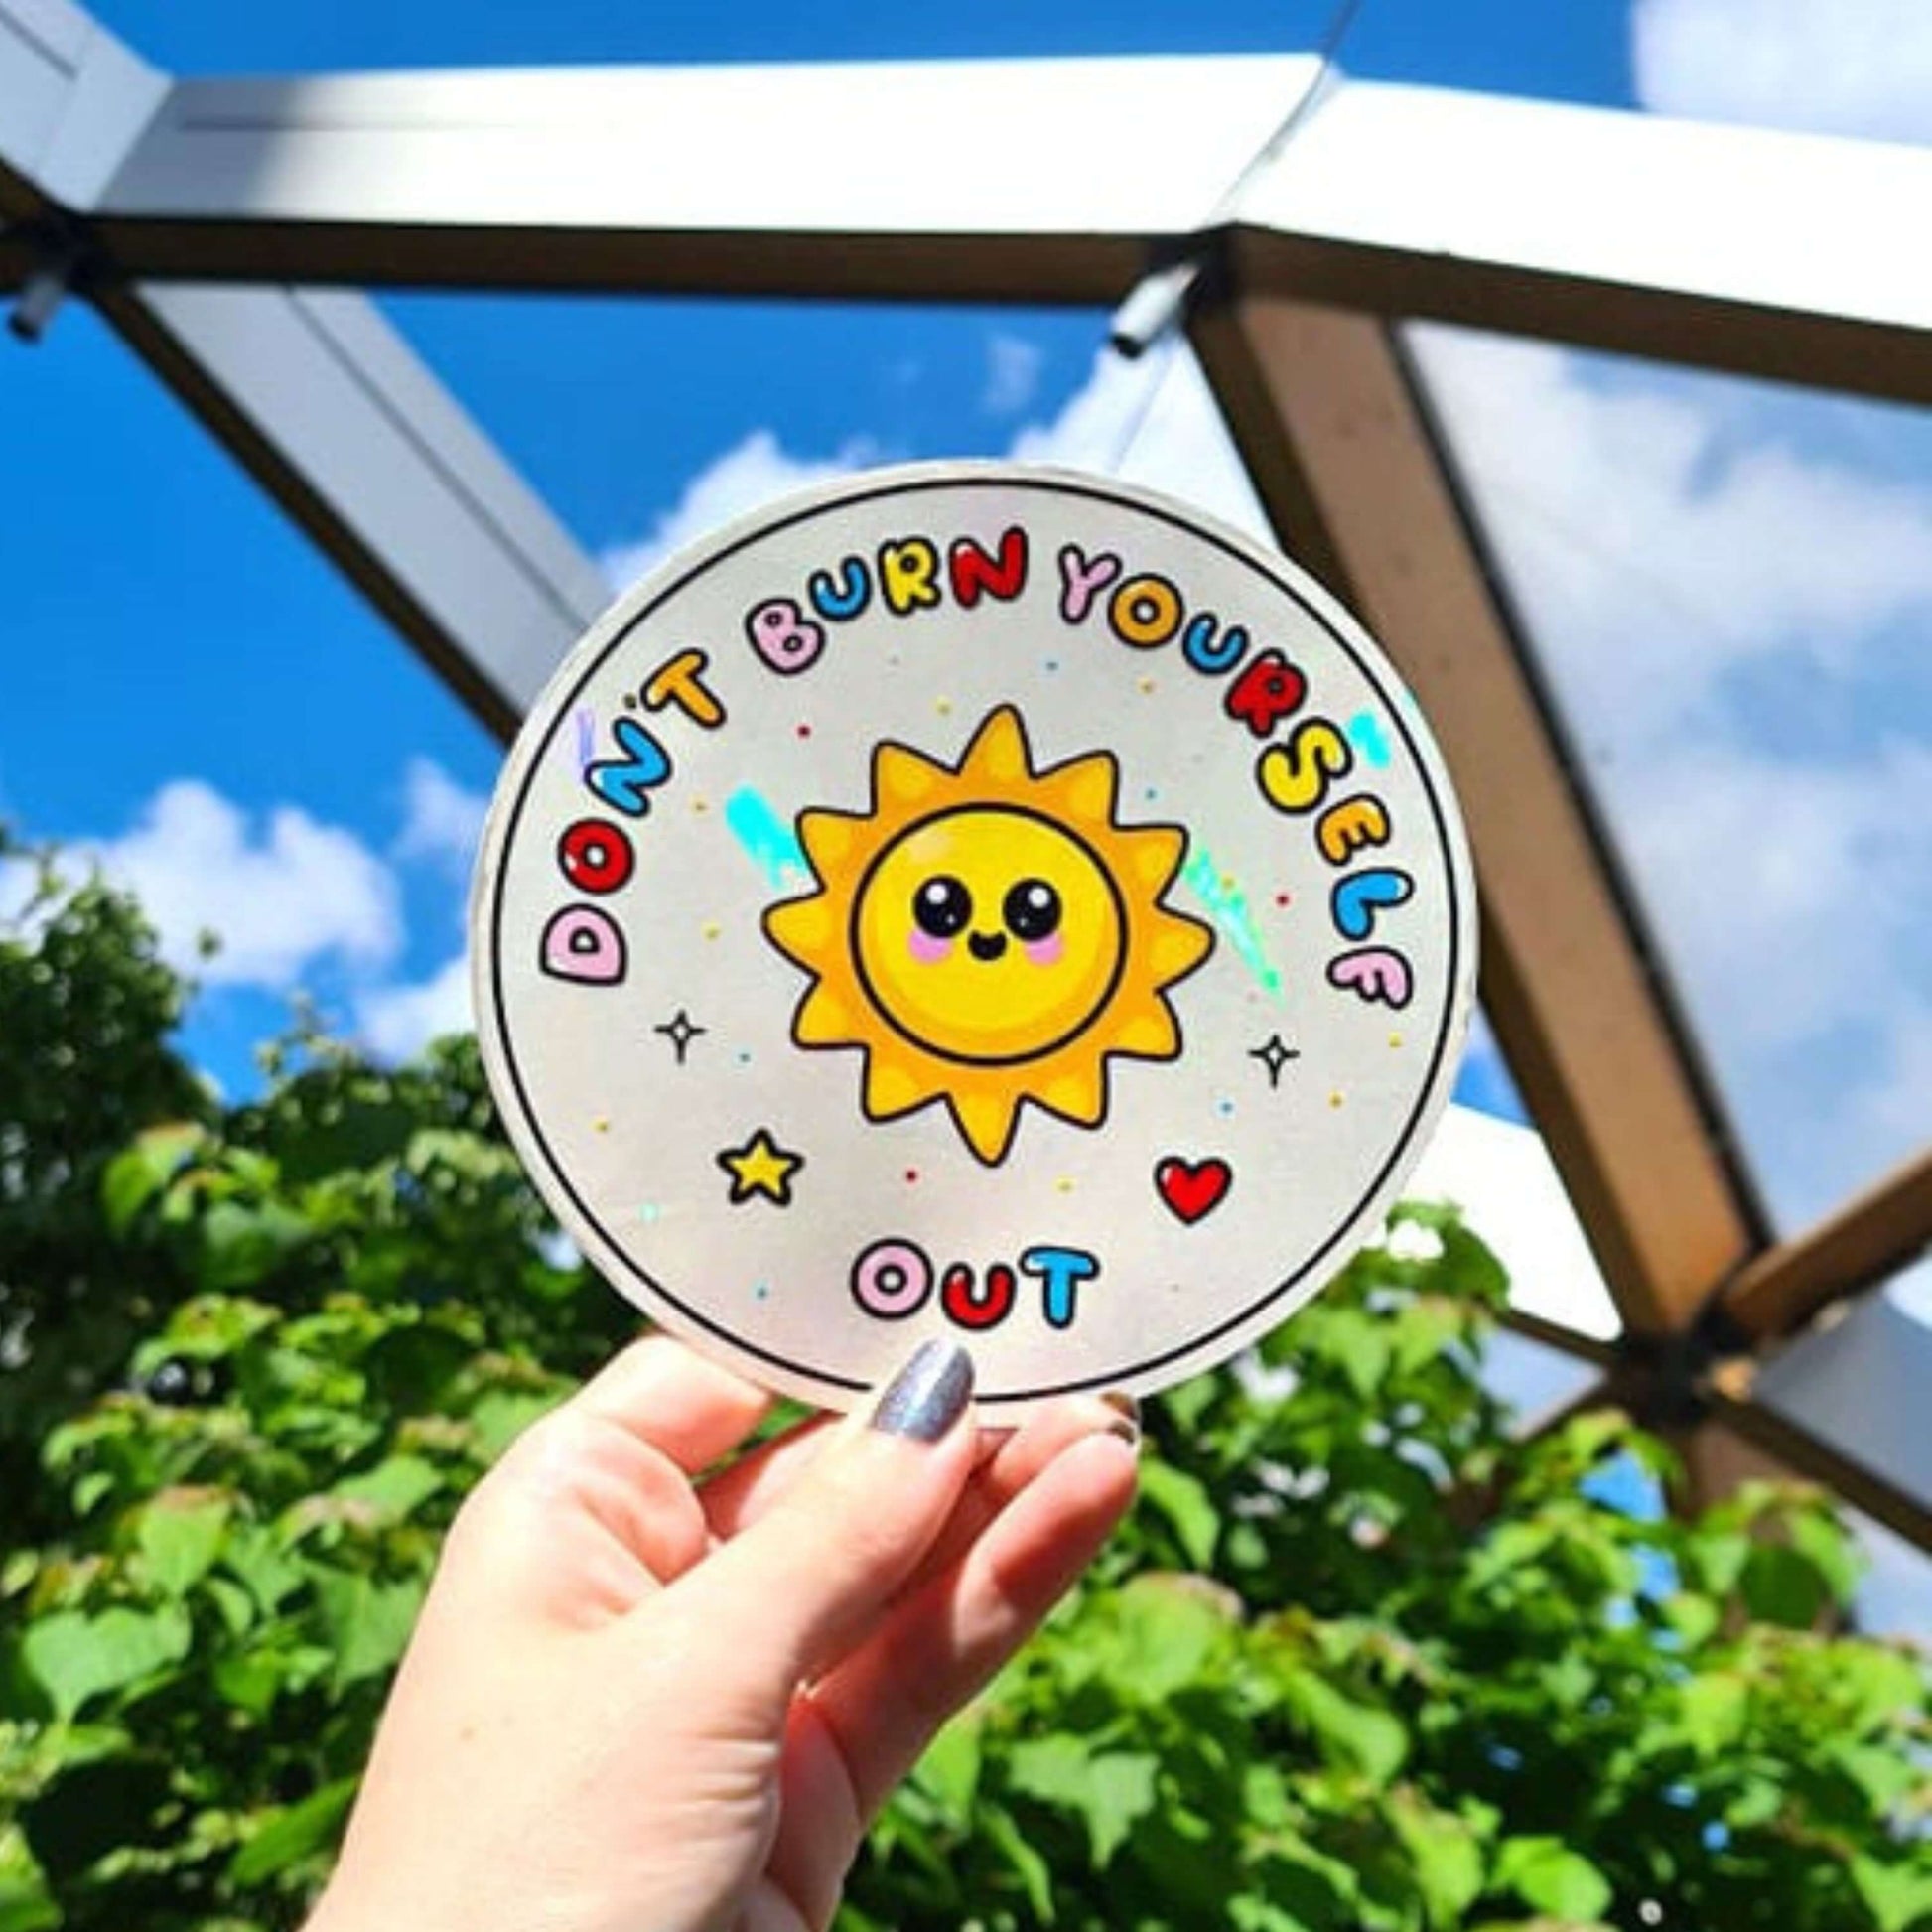 The Don't Burn Yourself Out Sun Catcher Rainbow Window Sticker being held up in front of an outdoor greenhouse full of green plants. The circle holographic sticker features a smiling sunshine with pink blush in the middle with rainbow bubble writing reading 'don't burn yourself out' with a yellow star, red heart, black sparkle outlines and rainbow dots all over. The design is inspired by self care.